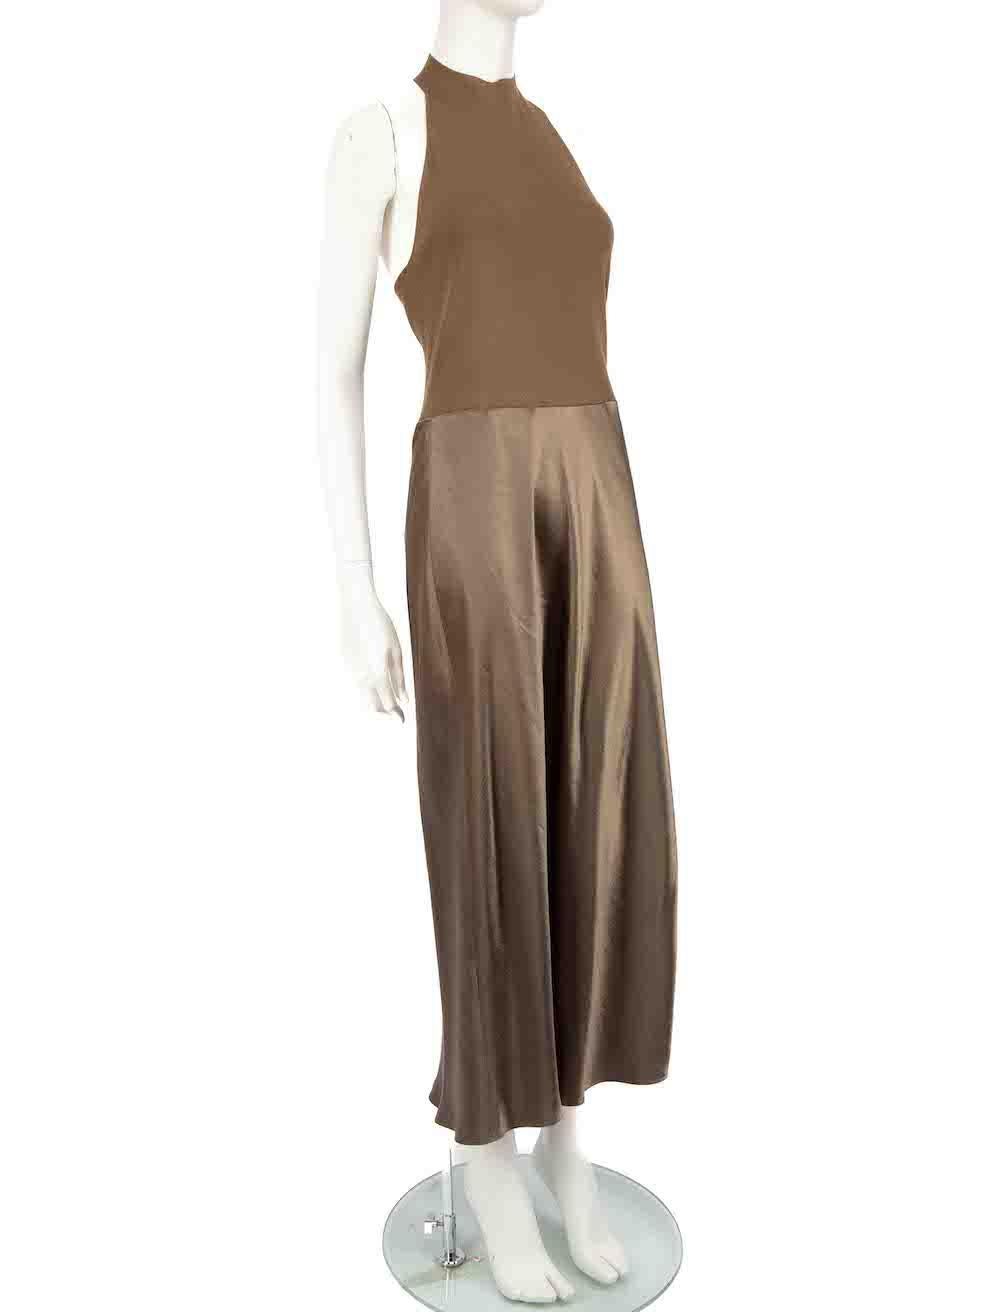 CONDITION is Very good. Minimal wear to dress is evident. Minimal discoloured mark to rear of skirt on this used Vince designer resale item.
 
 
 
 Details
 
 
 Khaki
 
 Synthetic
 
 Dress
 
 Halterneck
 
 Back neck clasp fastening
 
 Maxi
 
